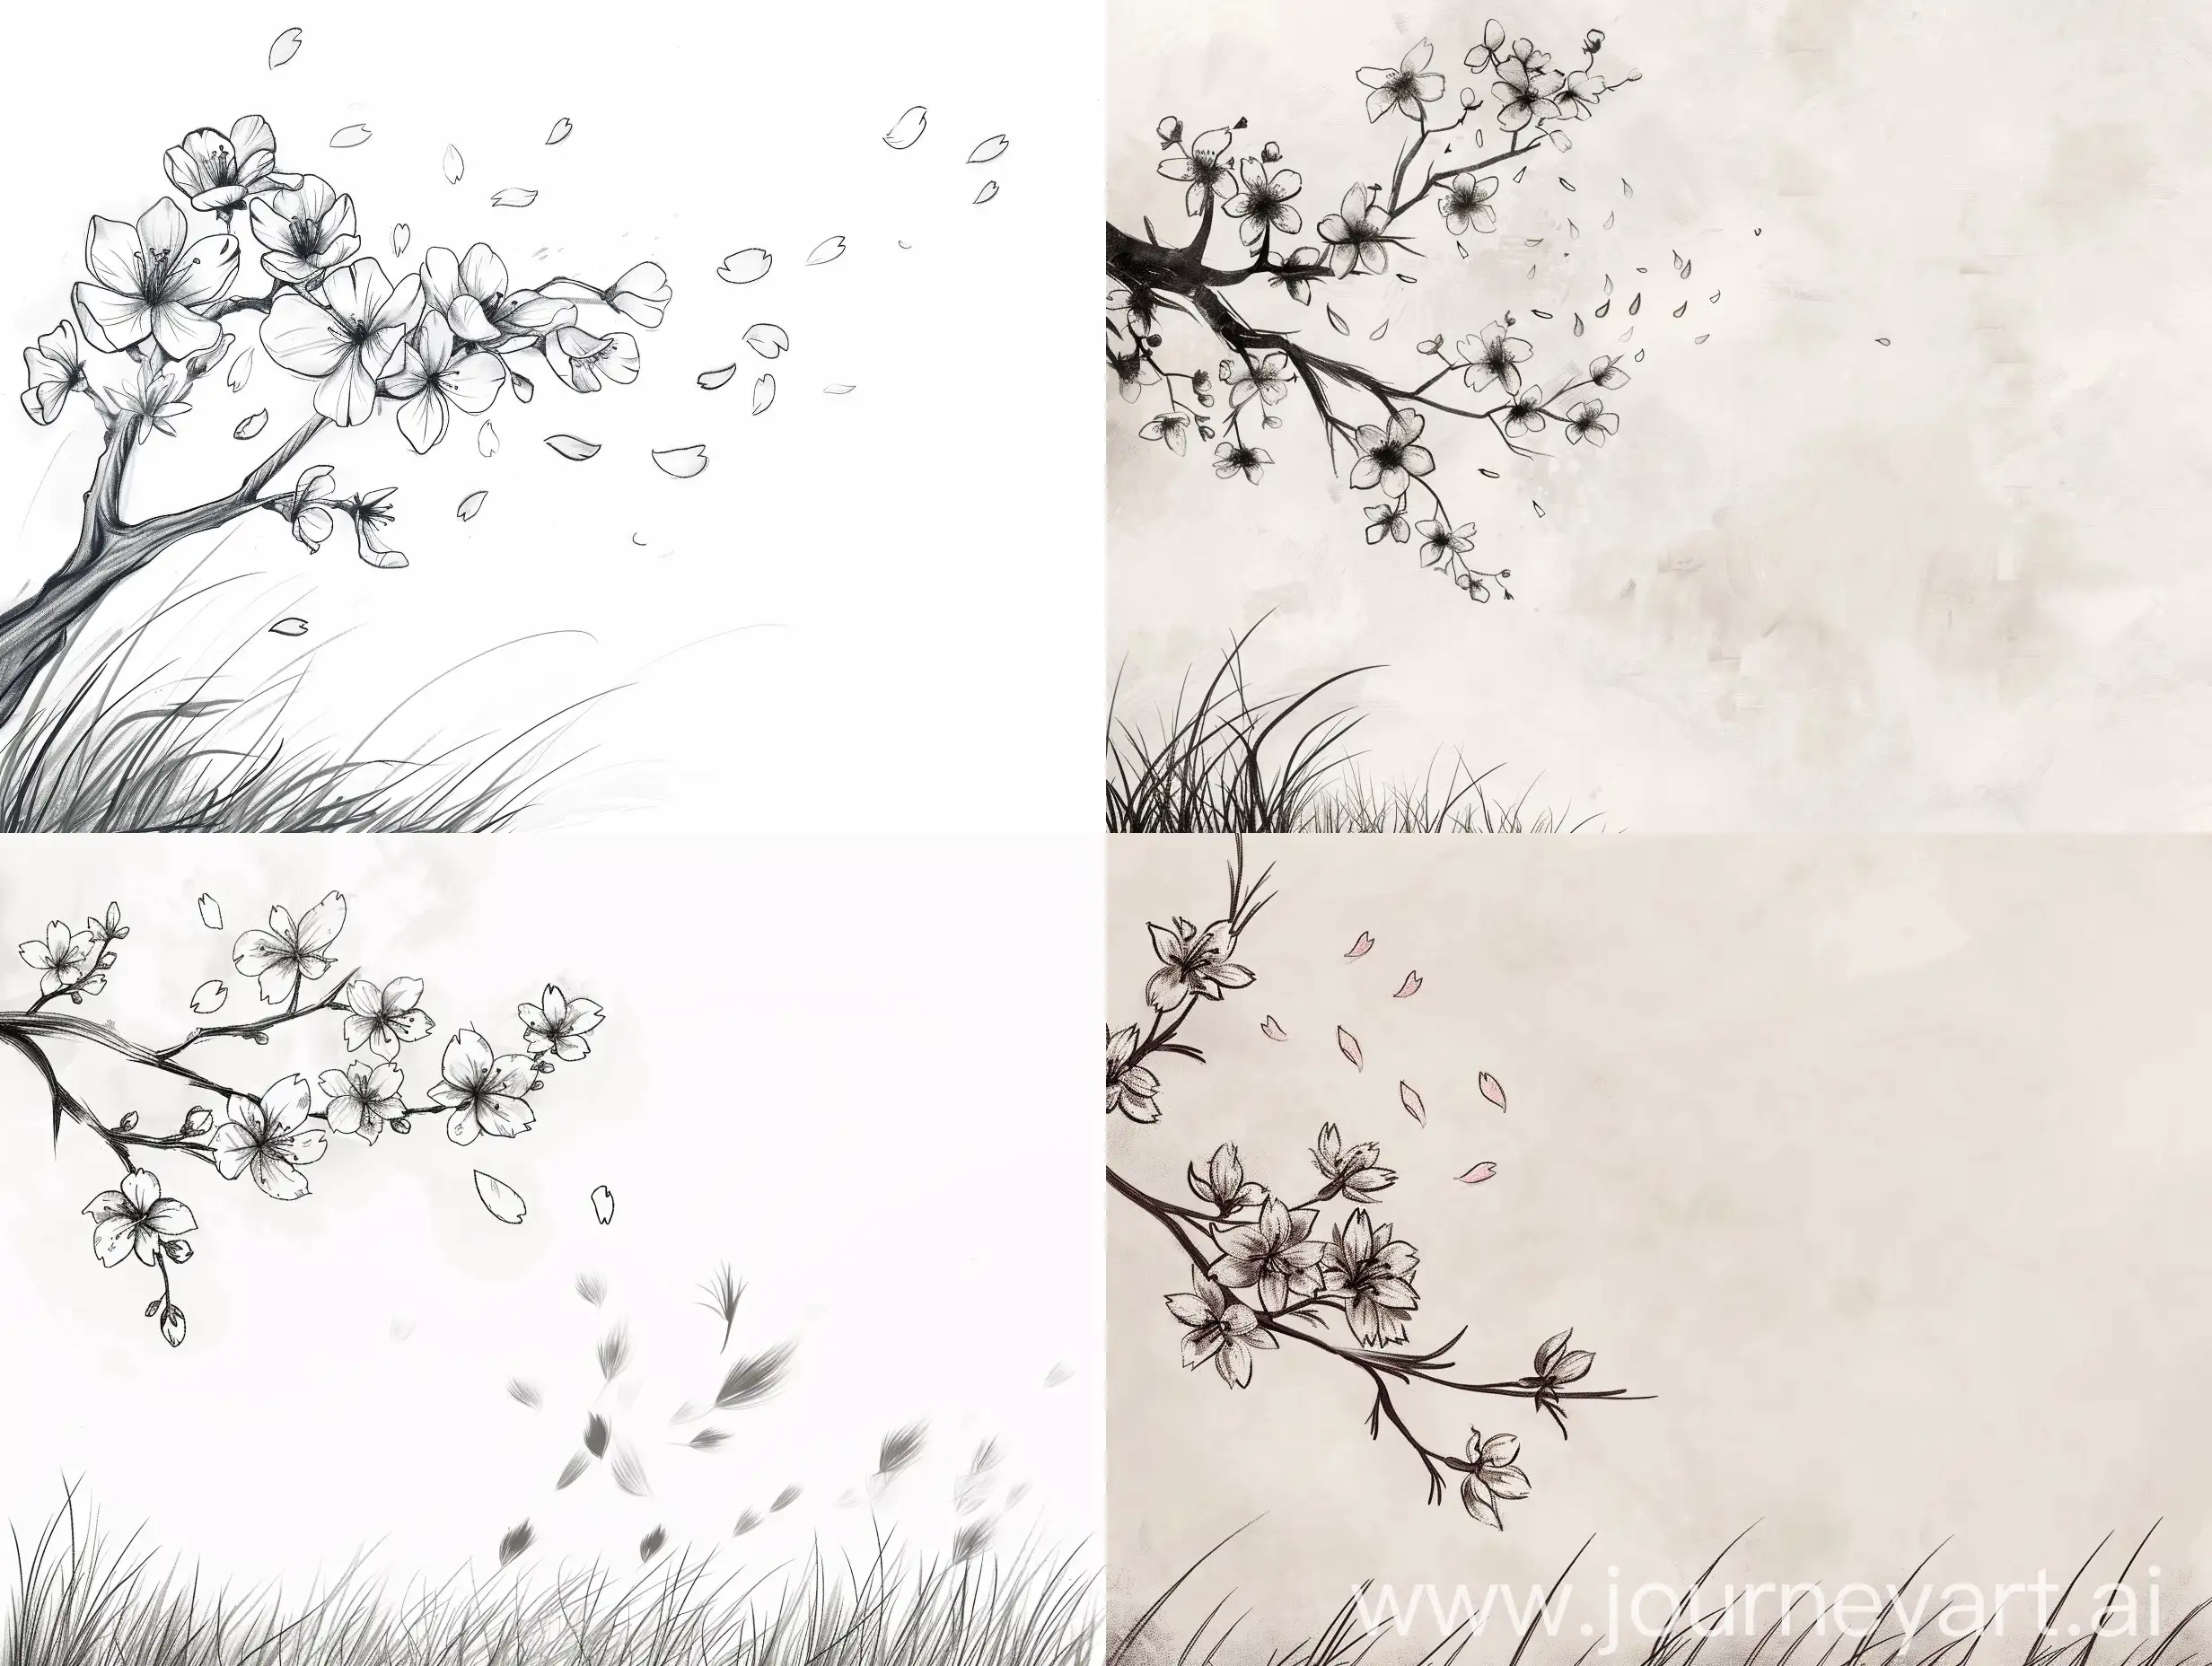 I want a sketch of a branch of cherry blossoms coming out of the left side of the sketch and some petals flying in the wind. With some grass on the bottom of the sketch.